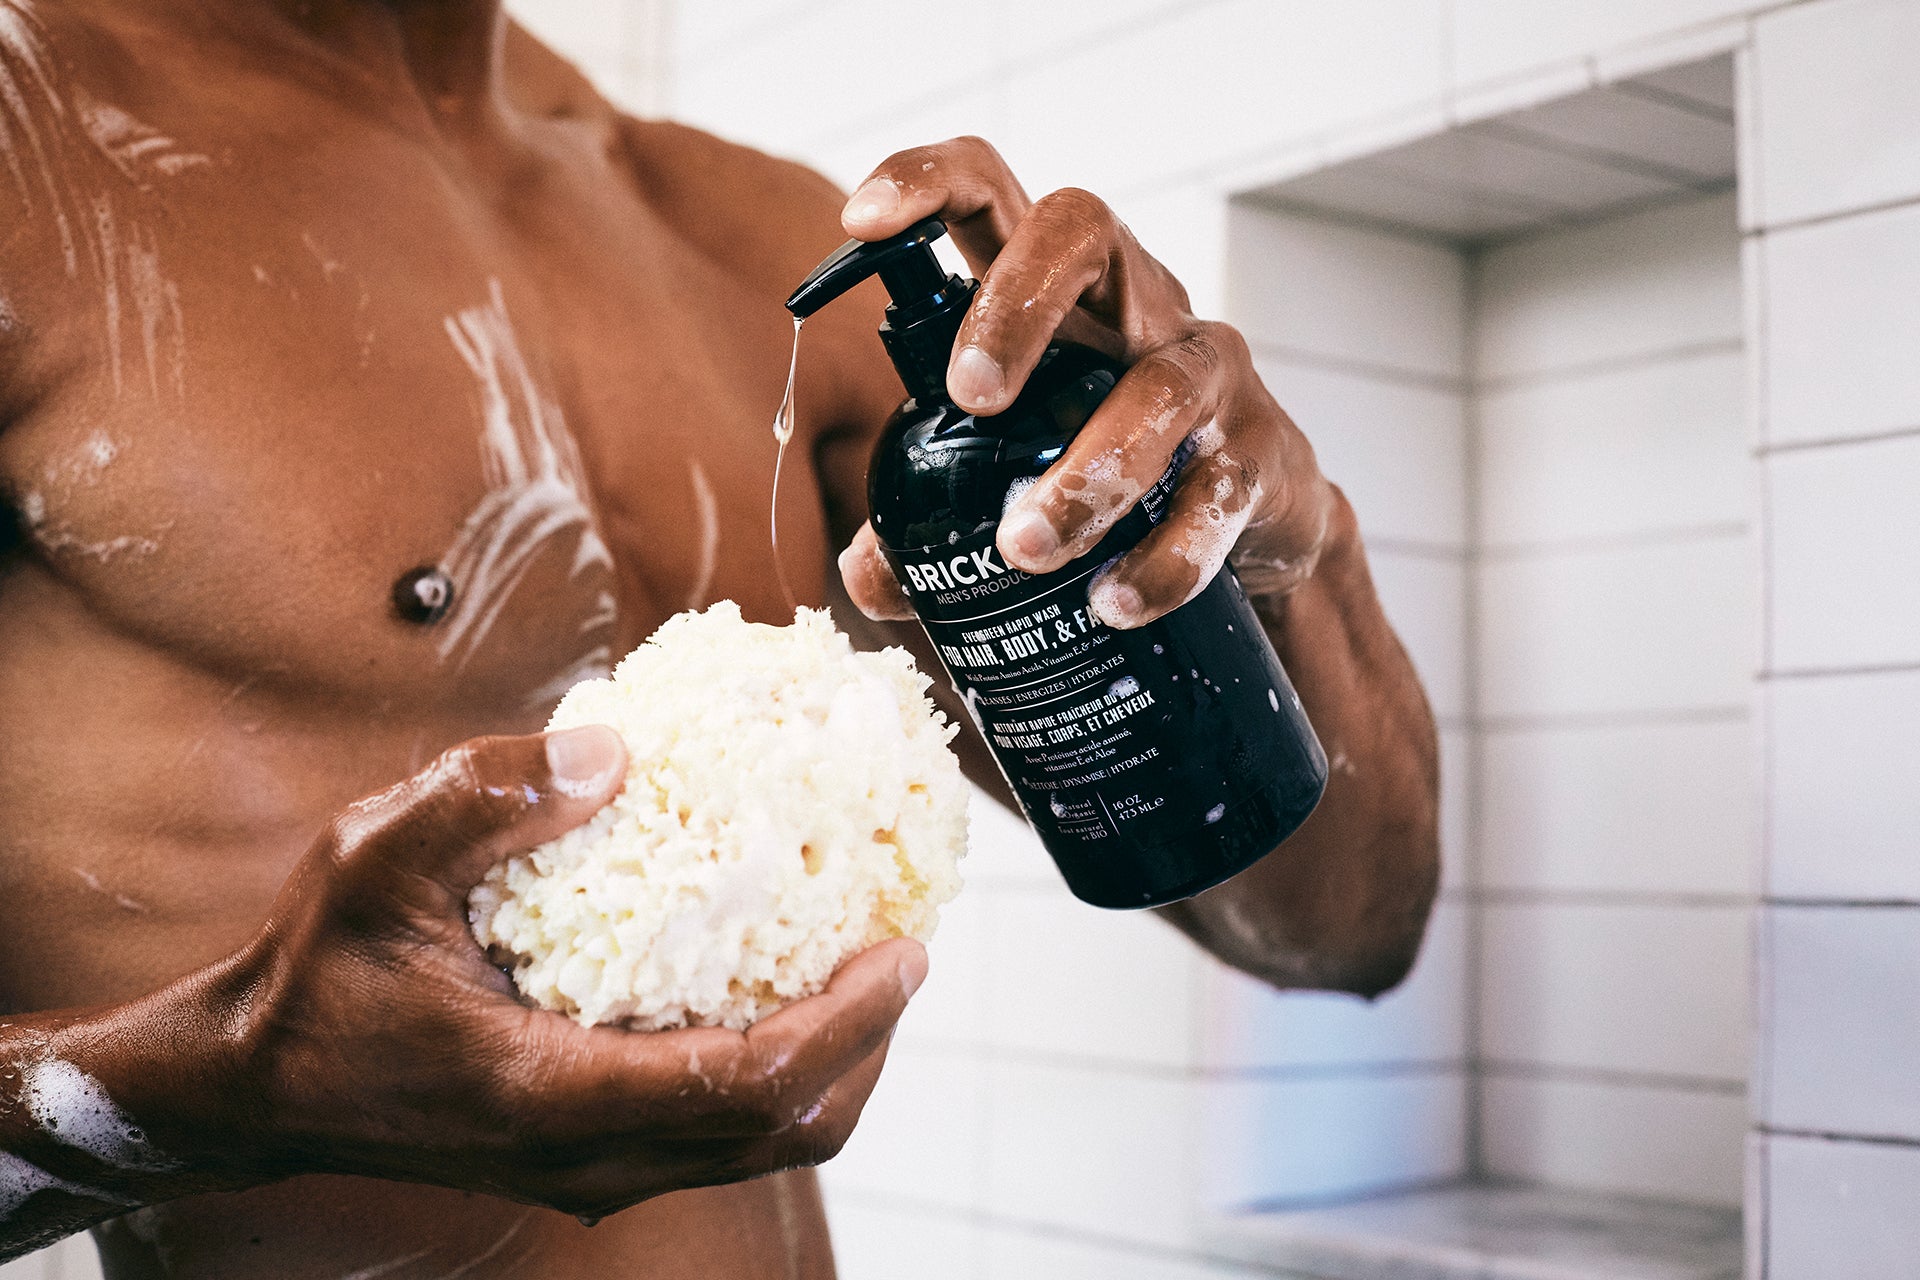 The Best All Natural Hand Soap for Men  Brickell Men's Products – Brickell  Men's Products®